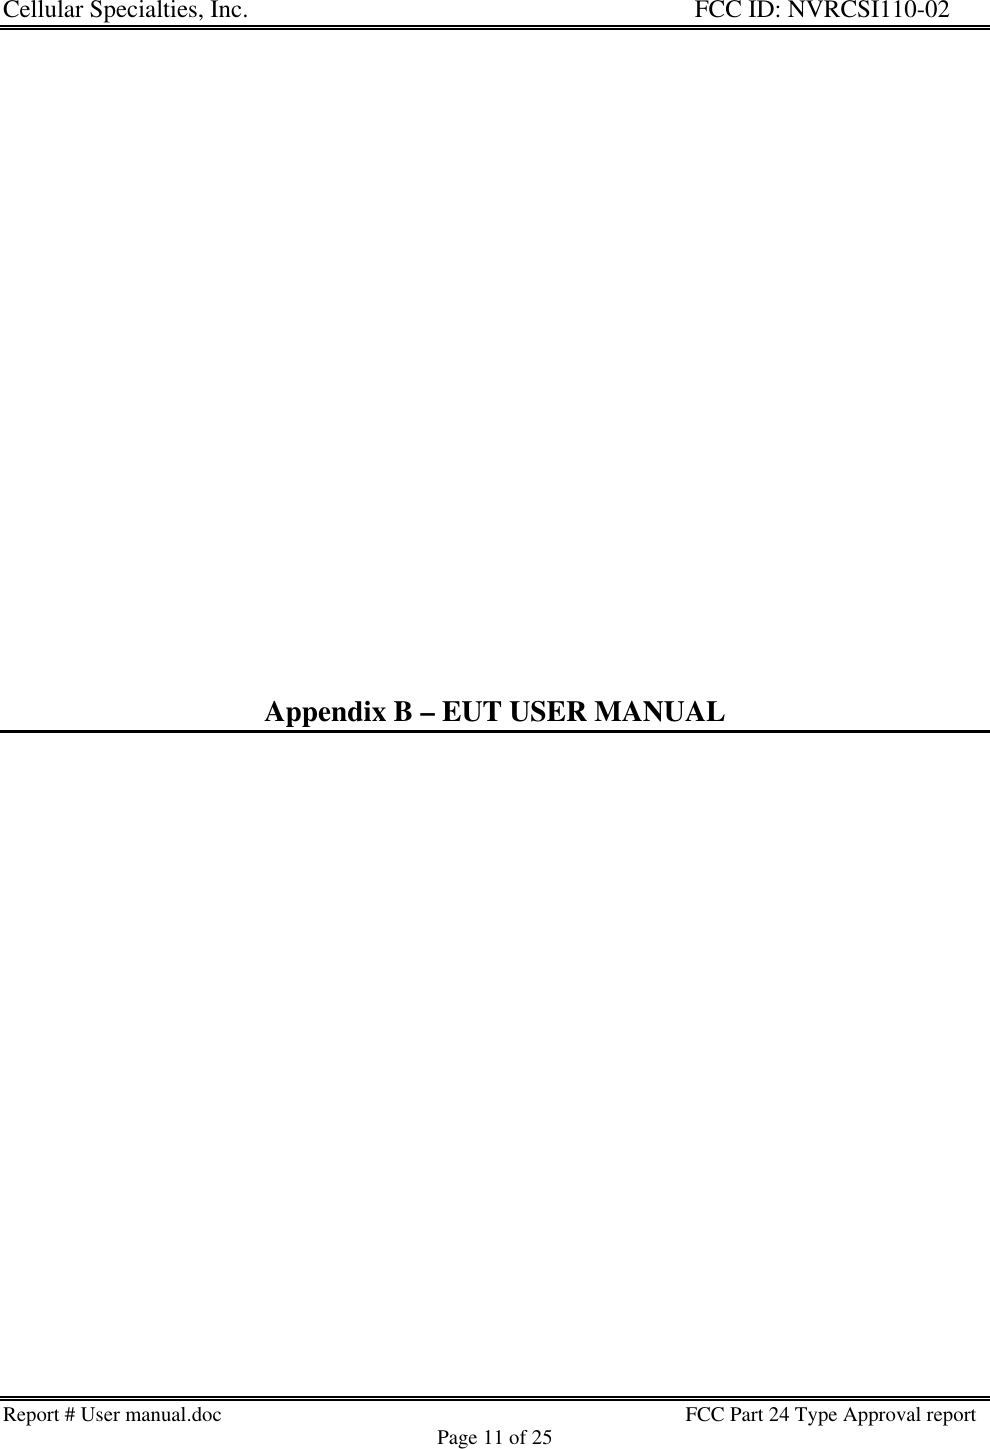 Cellular Specialties, Inc. FCC ID: NVRCSI110-02Report # User manual.doc                                                                                         FCC Part 24 Type Approval reportPage 11 of 25Appendix B – EUT USER MANUAL